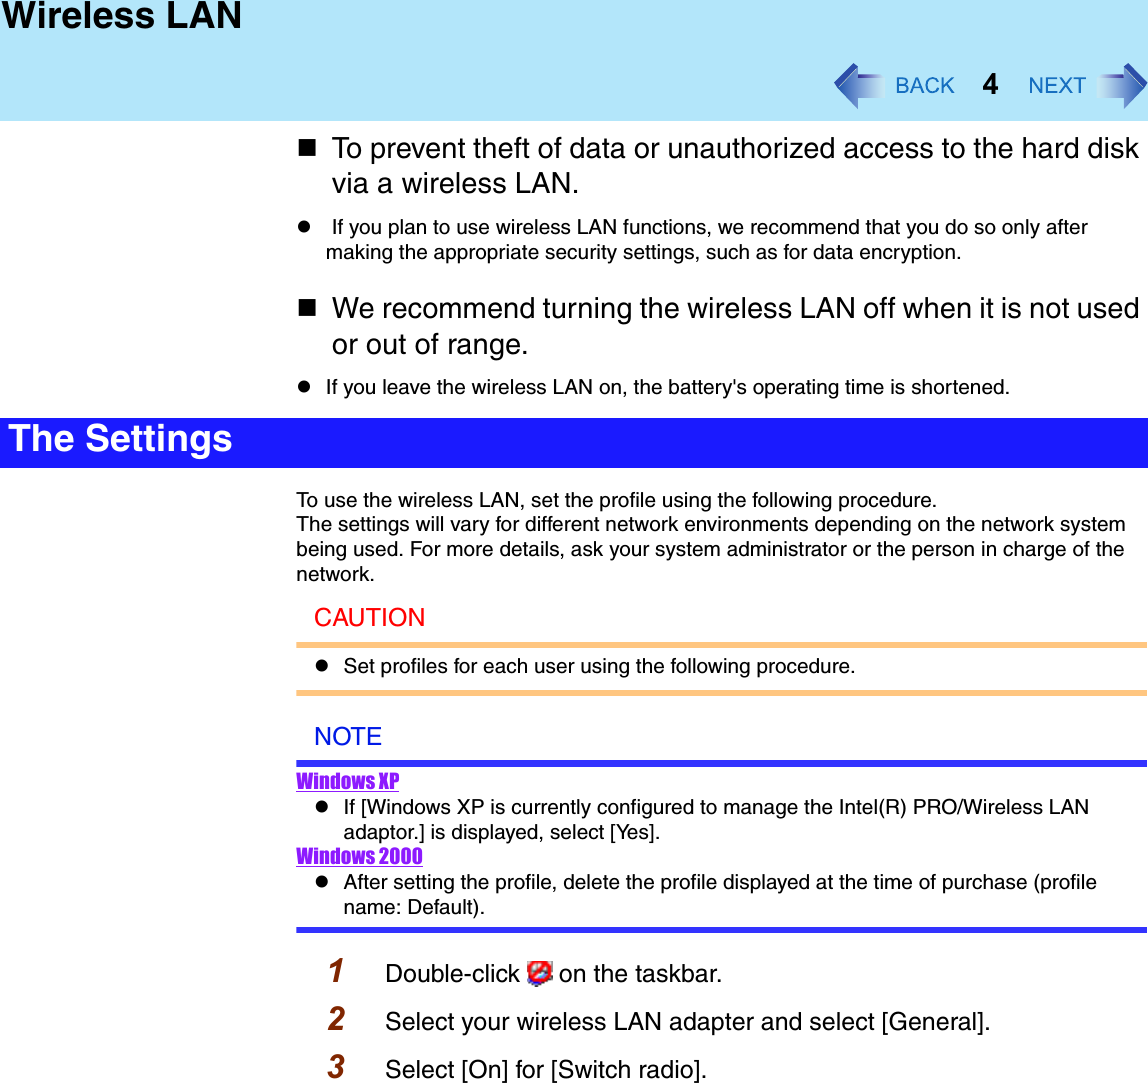 4Wireless LANTo prevent theft of data or unauthorized access to the hard disk via a wireless LAN.z If you plan to use wireless LAN functions, we recommend that you do so only after making the appropriate security settings, such as for data encryption.We recommend turning the wireless LAN off when it is not used or out of range.zIf you leave the wireless LAN on, the battery&apos;s operating time is shortened.To use the wireless LAN, set the profile using the following procedure.The settings will vary for different network environments depending on the network system being used. For more details, ask your system administrator or the person in charge of the network.CAUTIONzSet profiles for each user using the following procedure.NOTEWindows XPzIf [Windows XP is currently configured to manage the Intel(R) PRO/Wireless LAN adaptor.] is displayed, select [Yes].Windows 2000zAfter setting the profile, delete the profile displayed at the time of purchase (profile name: Default).1Double-click   on the taskbar.2Select your wireless LAN adapter and select [General].3Select [On] for [Switch radio].The Settings